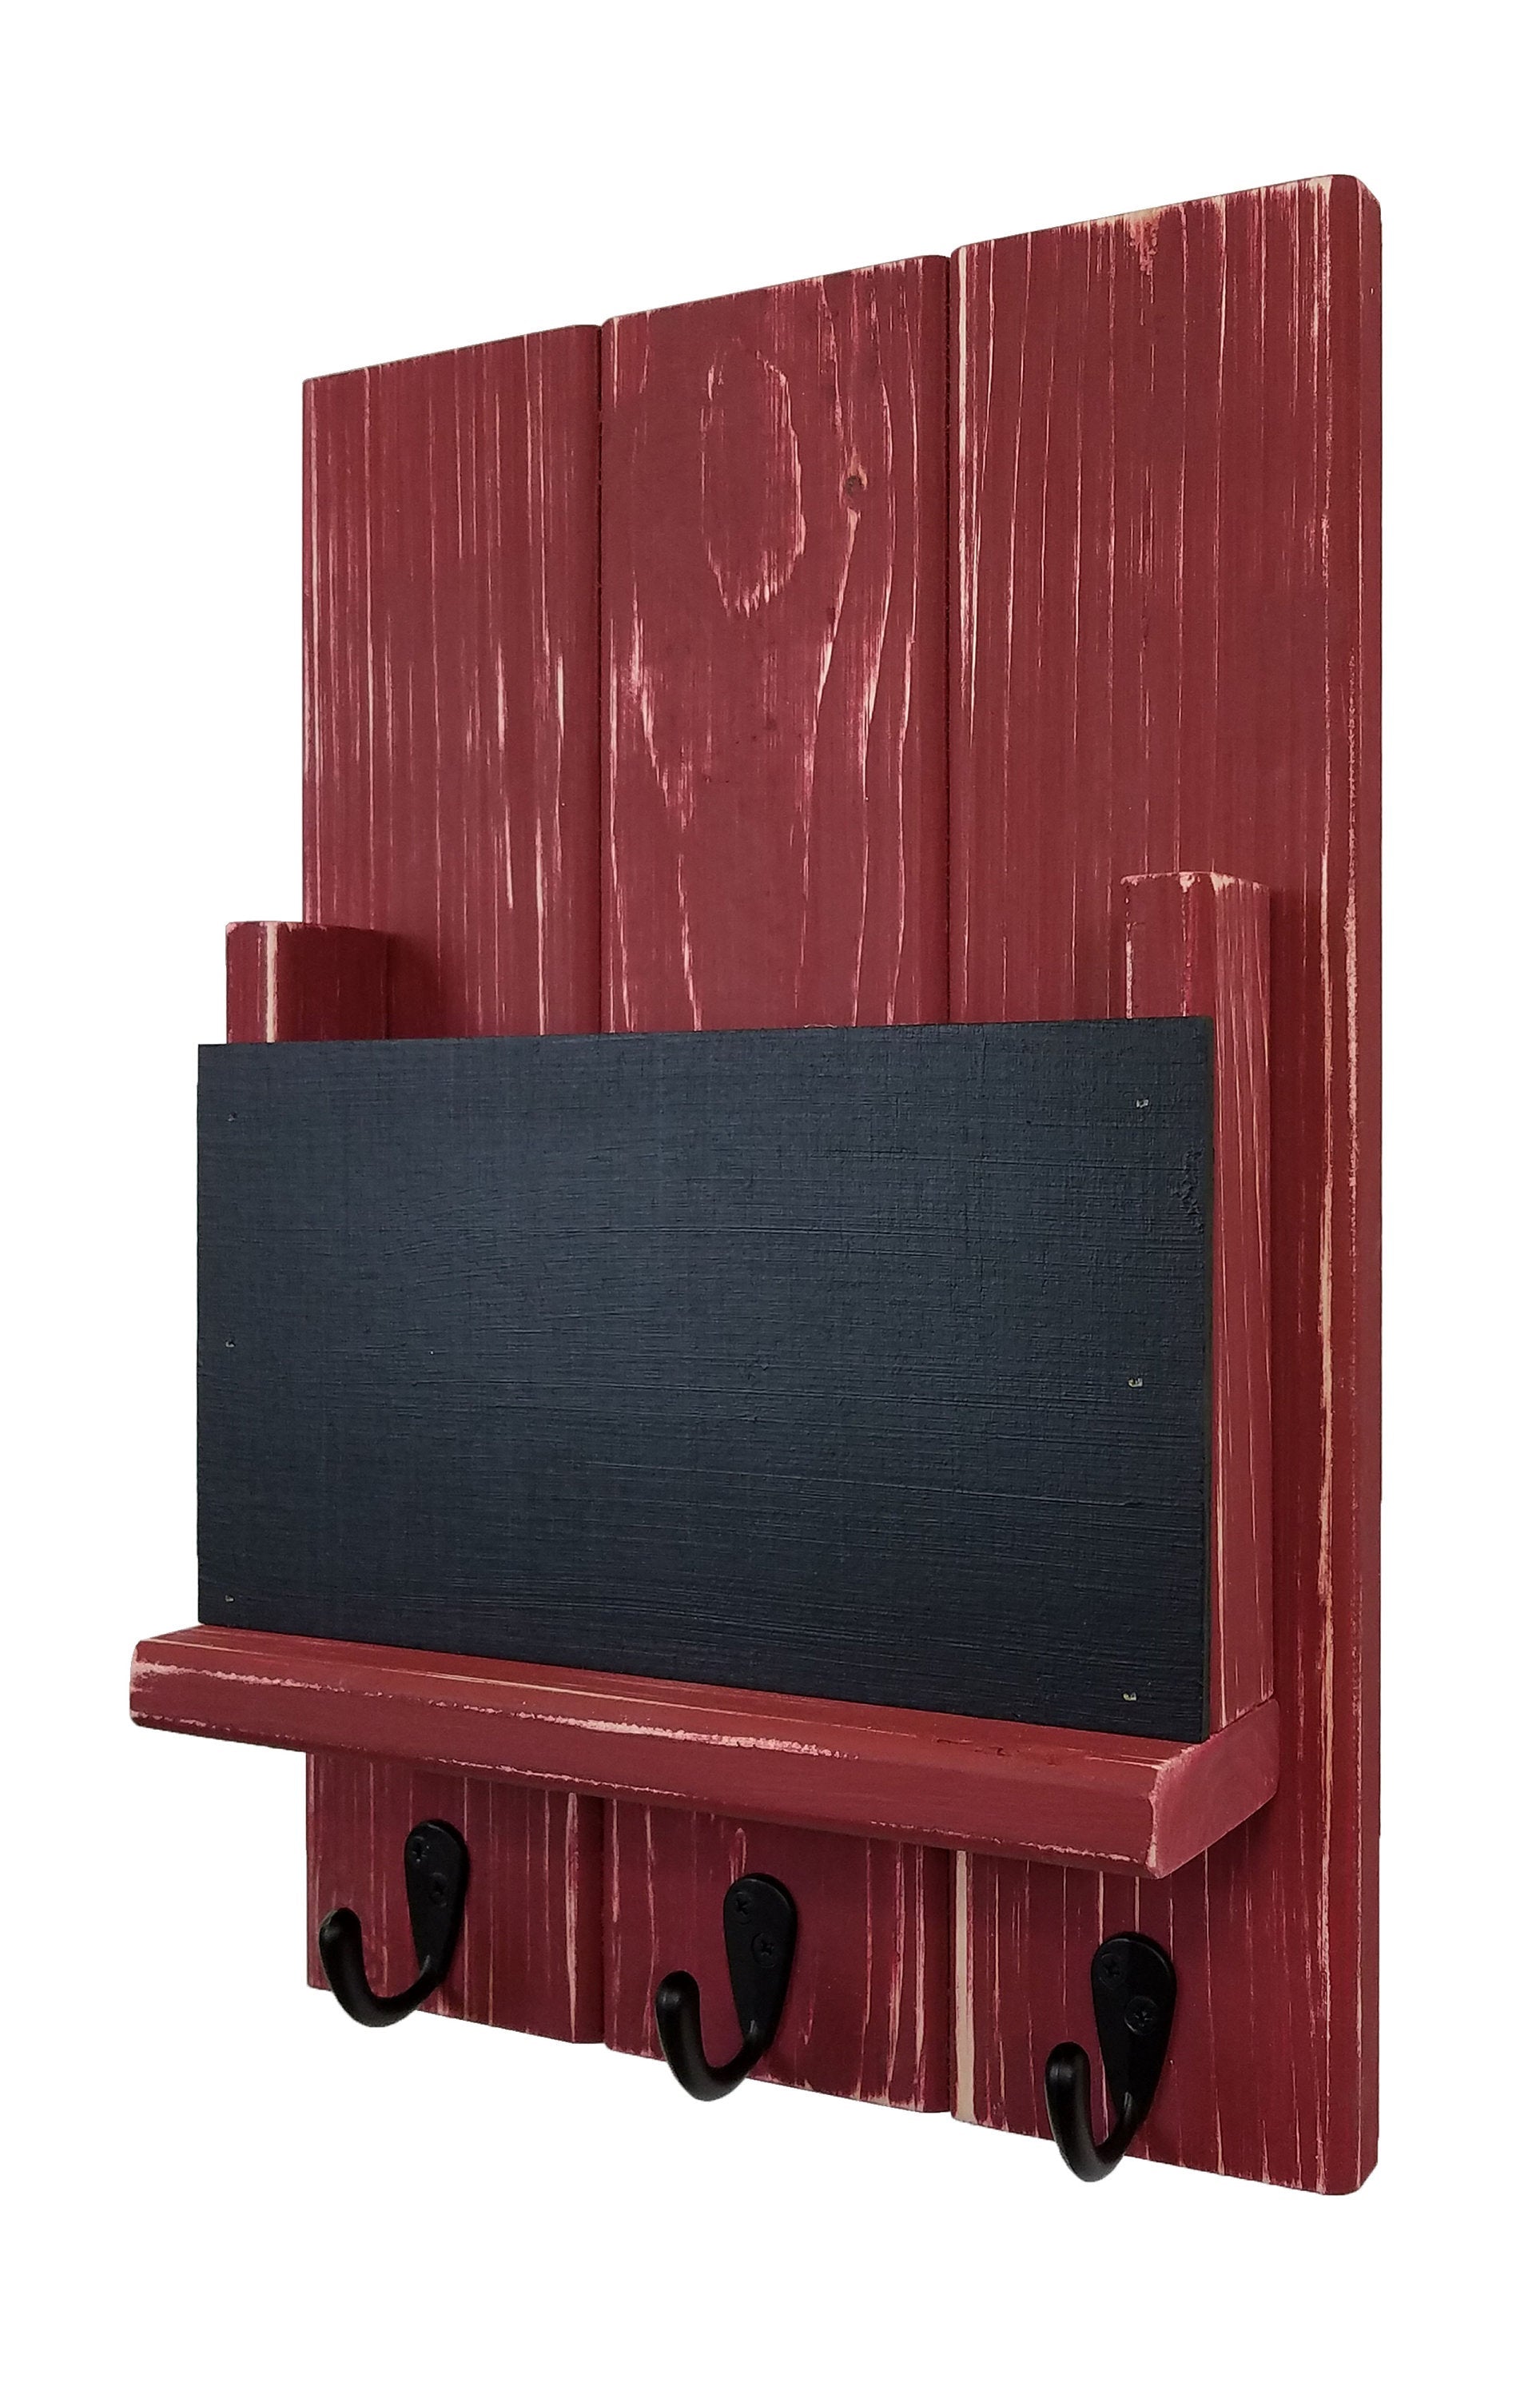 Chalkboard Front Sydney Mail Slot with Hooks, 20 Paint Colors, Shown in Sundried Tomato Red